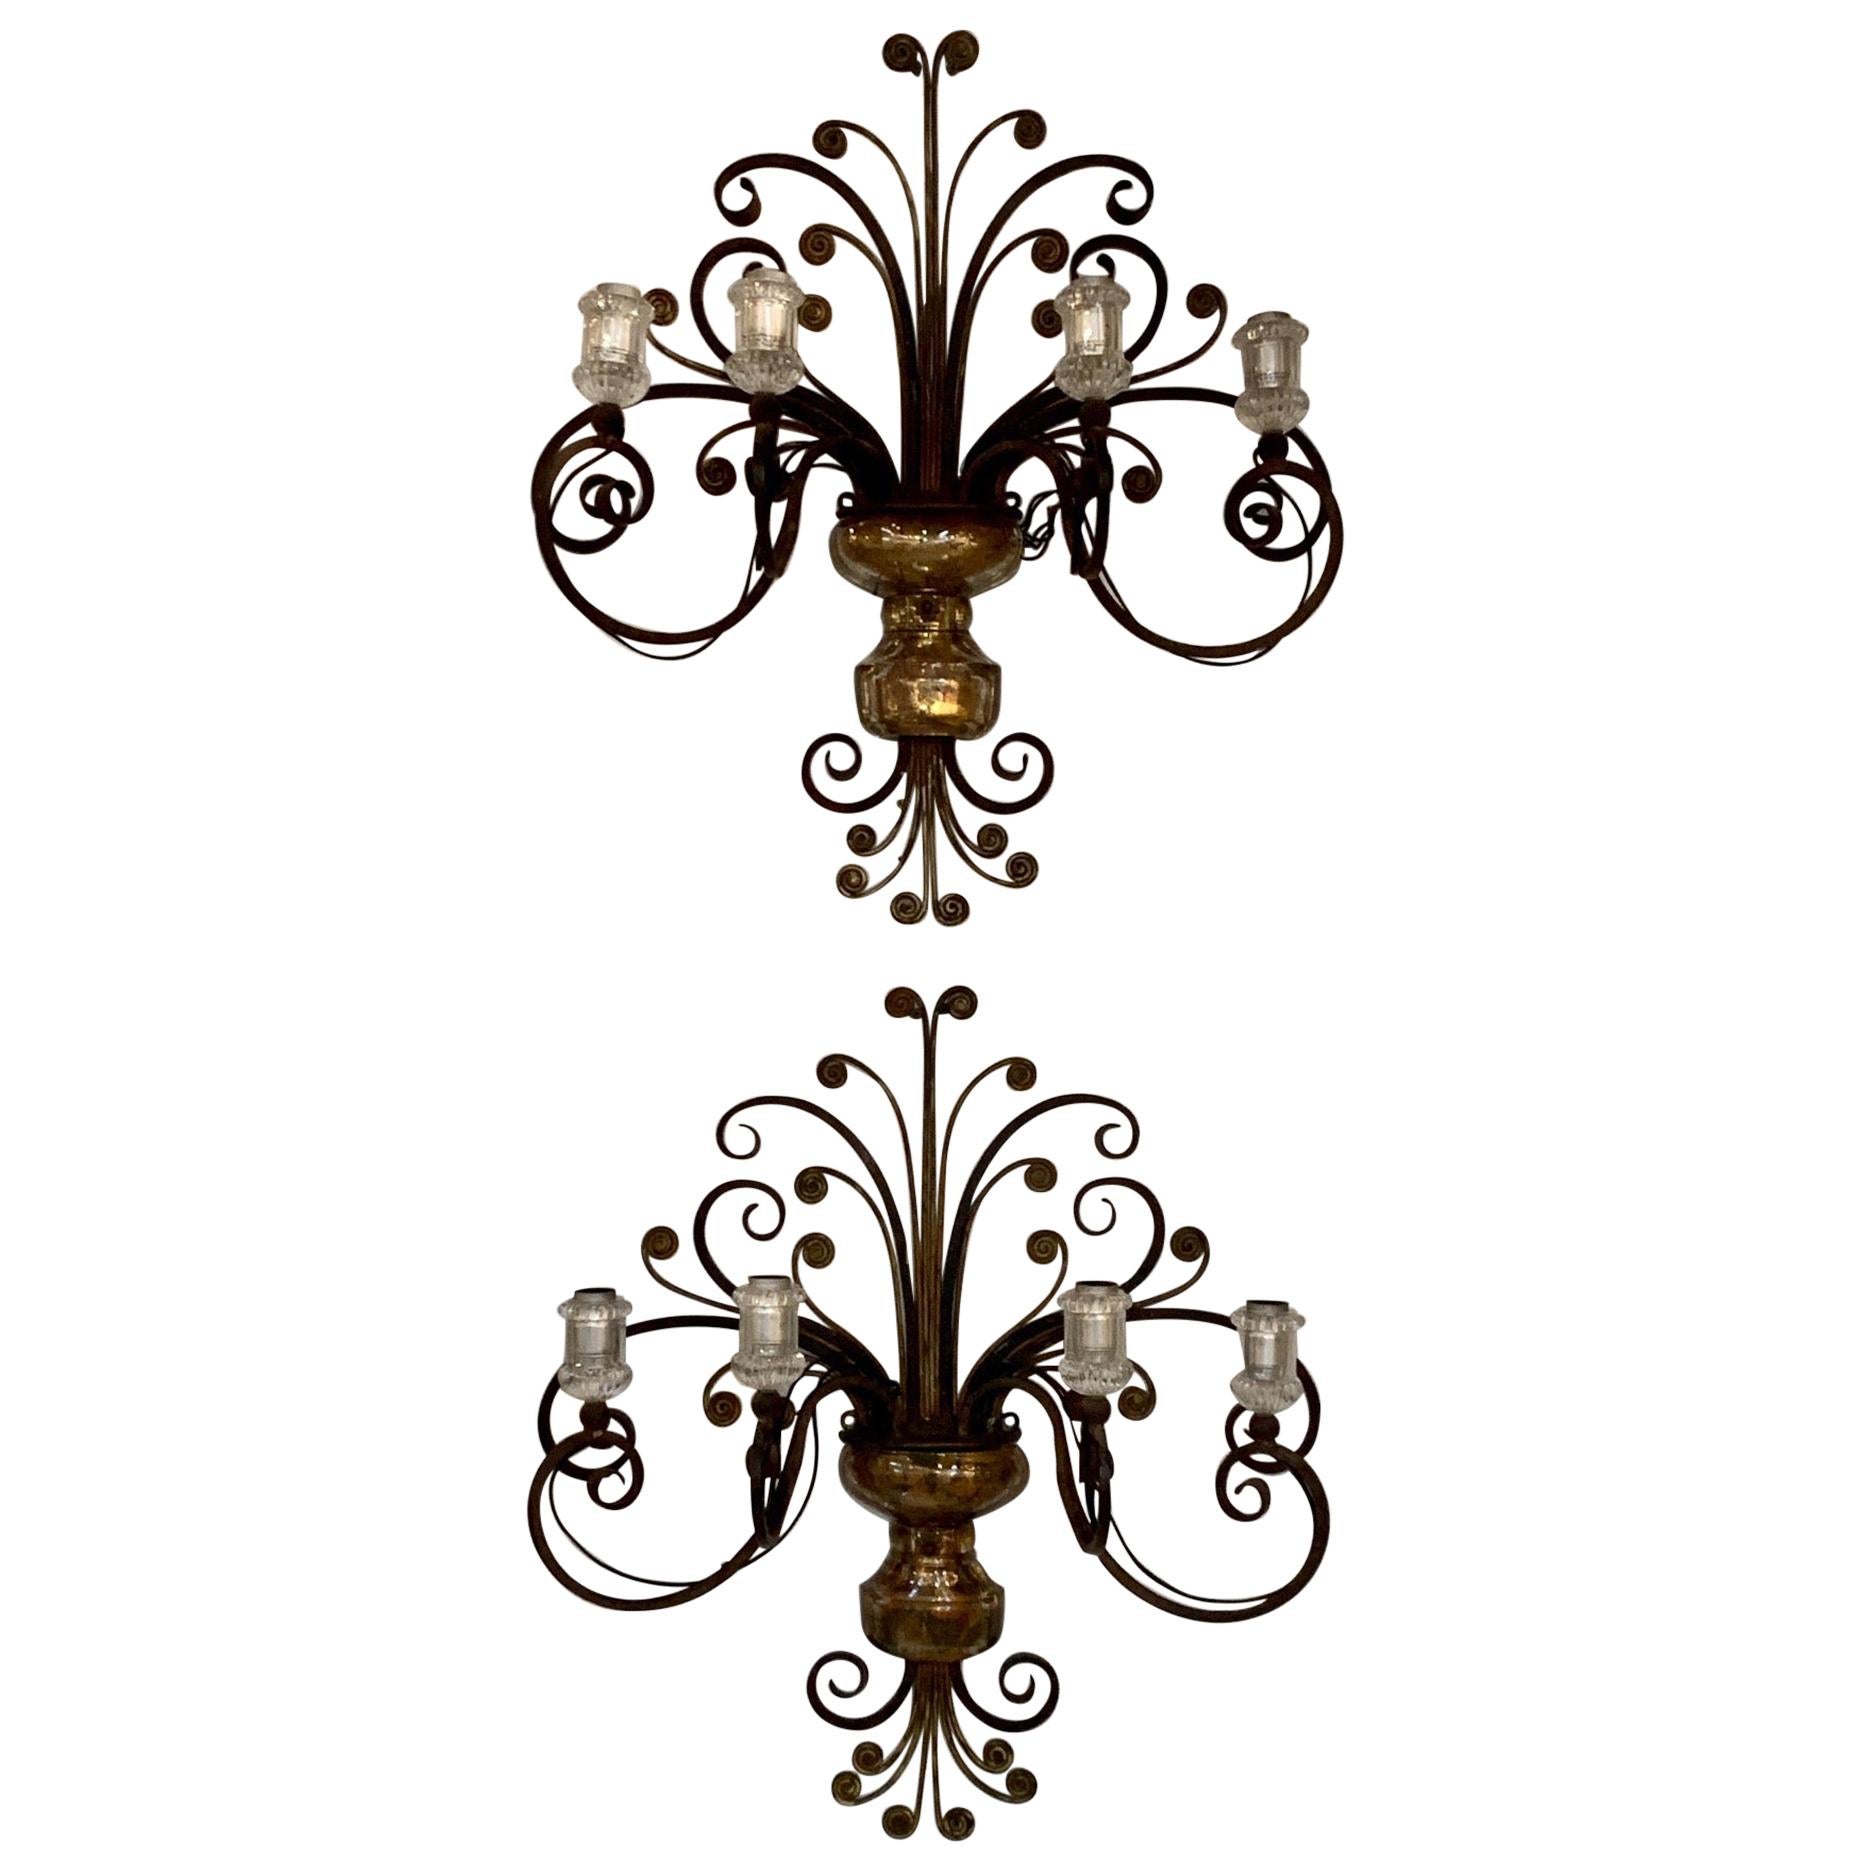 Pair of Vintage French Maison Baguès Iron and Foil Glass Wall Sconces For Sale